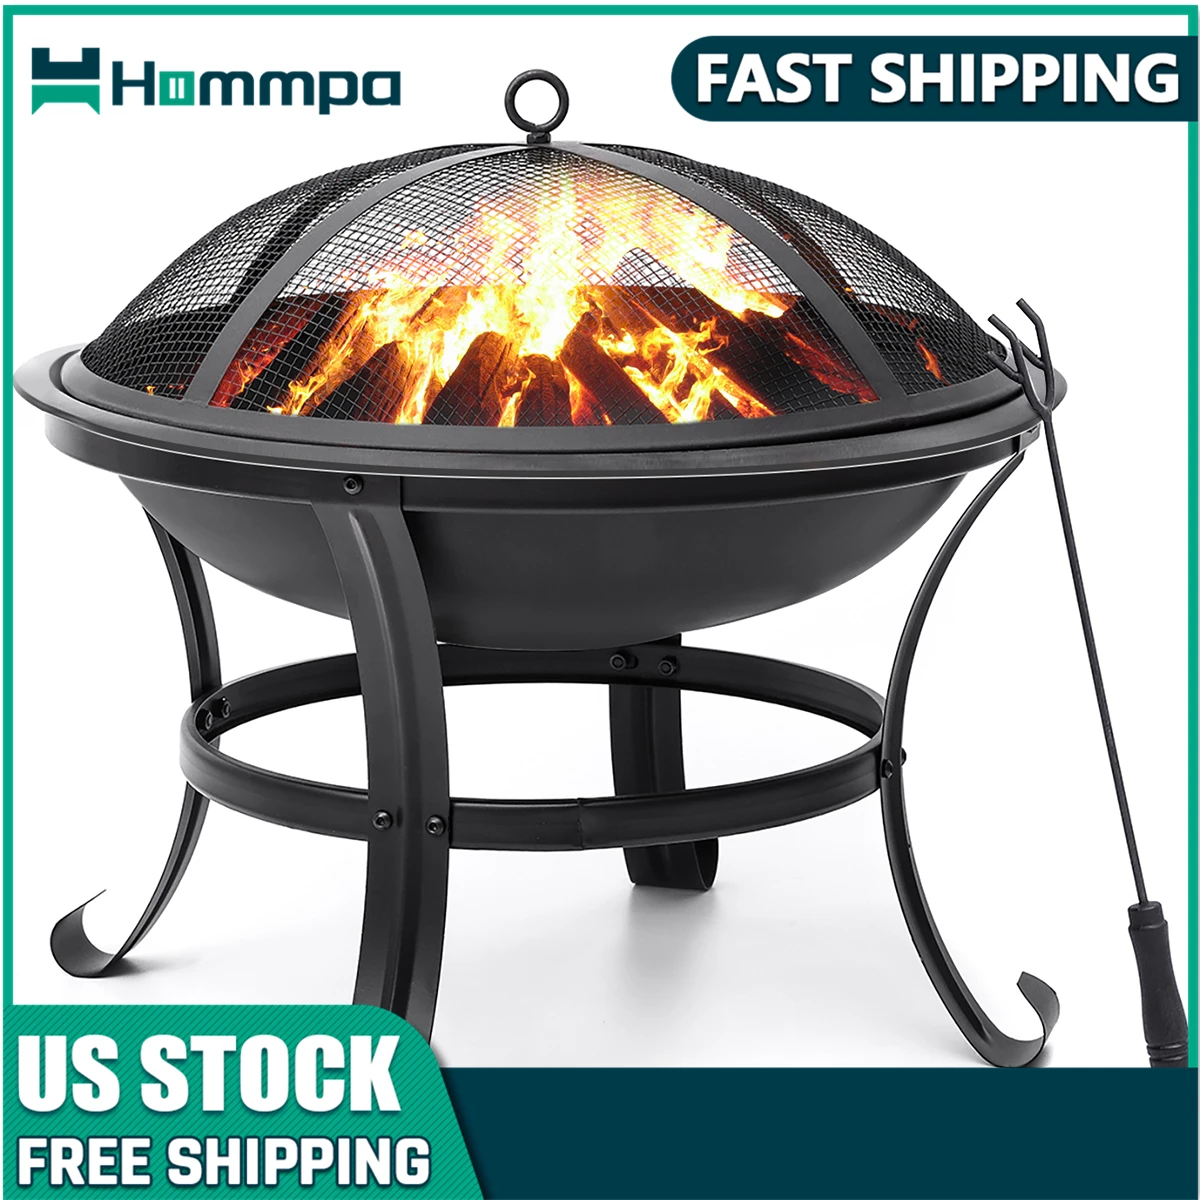 Hommpa 22 Inch Wood Burning Fire Pit for Camping Picnic Bonfires Patio Outside Backyard Garden Round Steel Black BBQ Grill